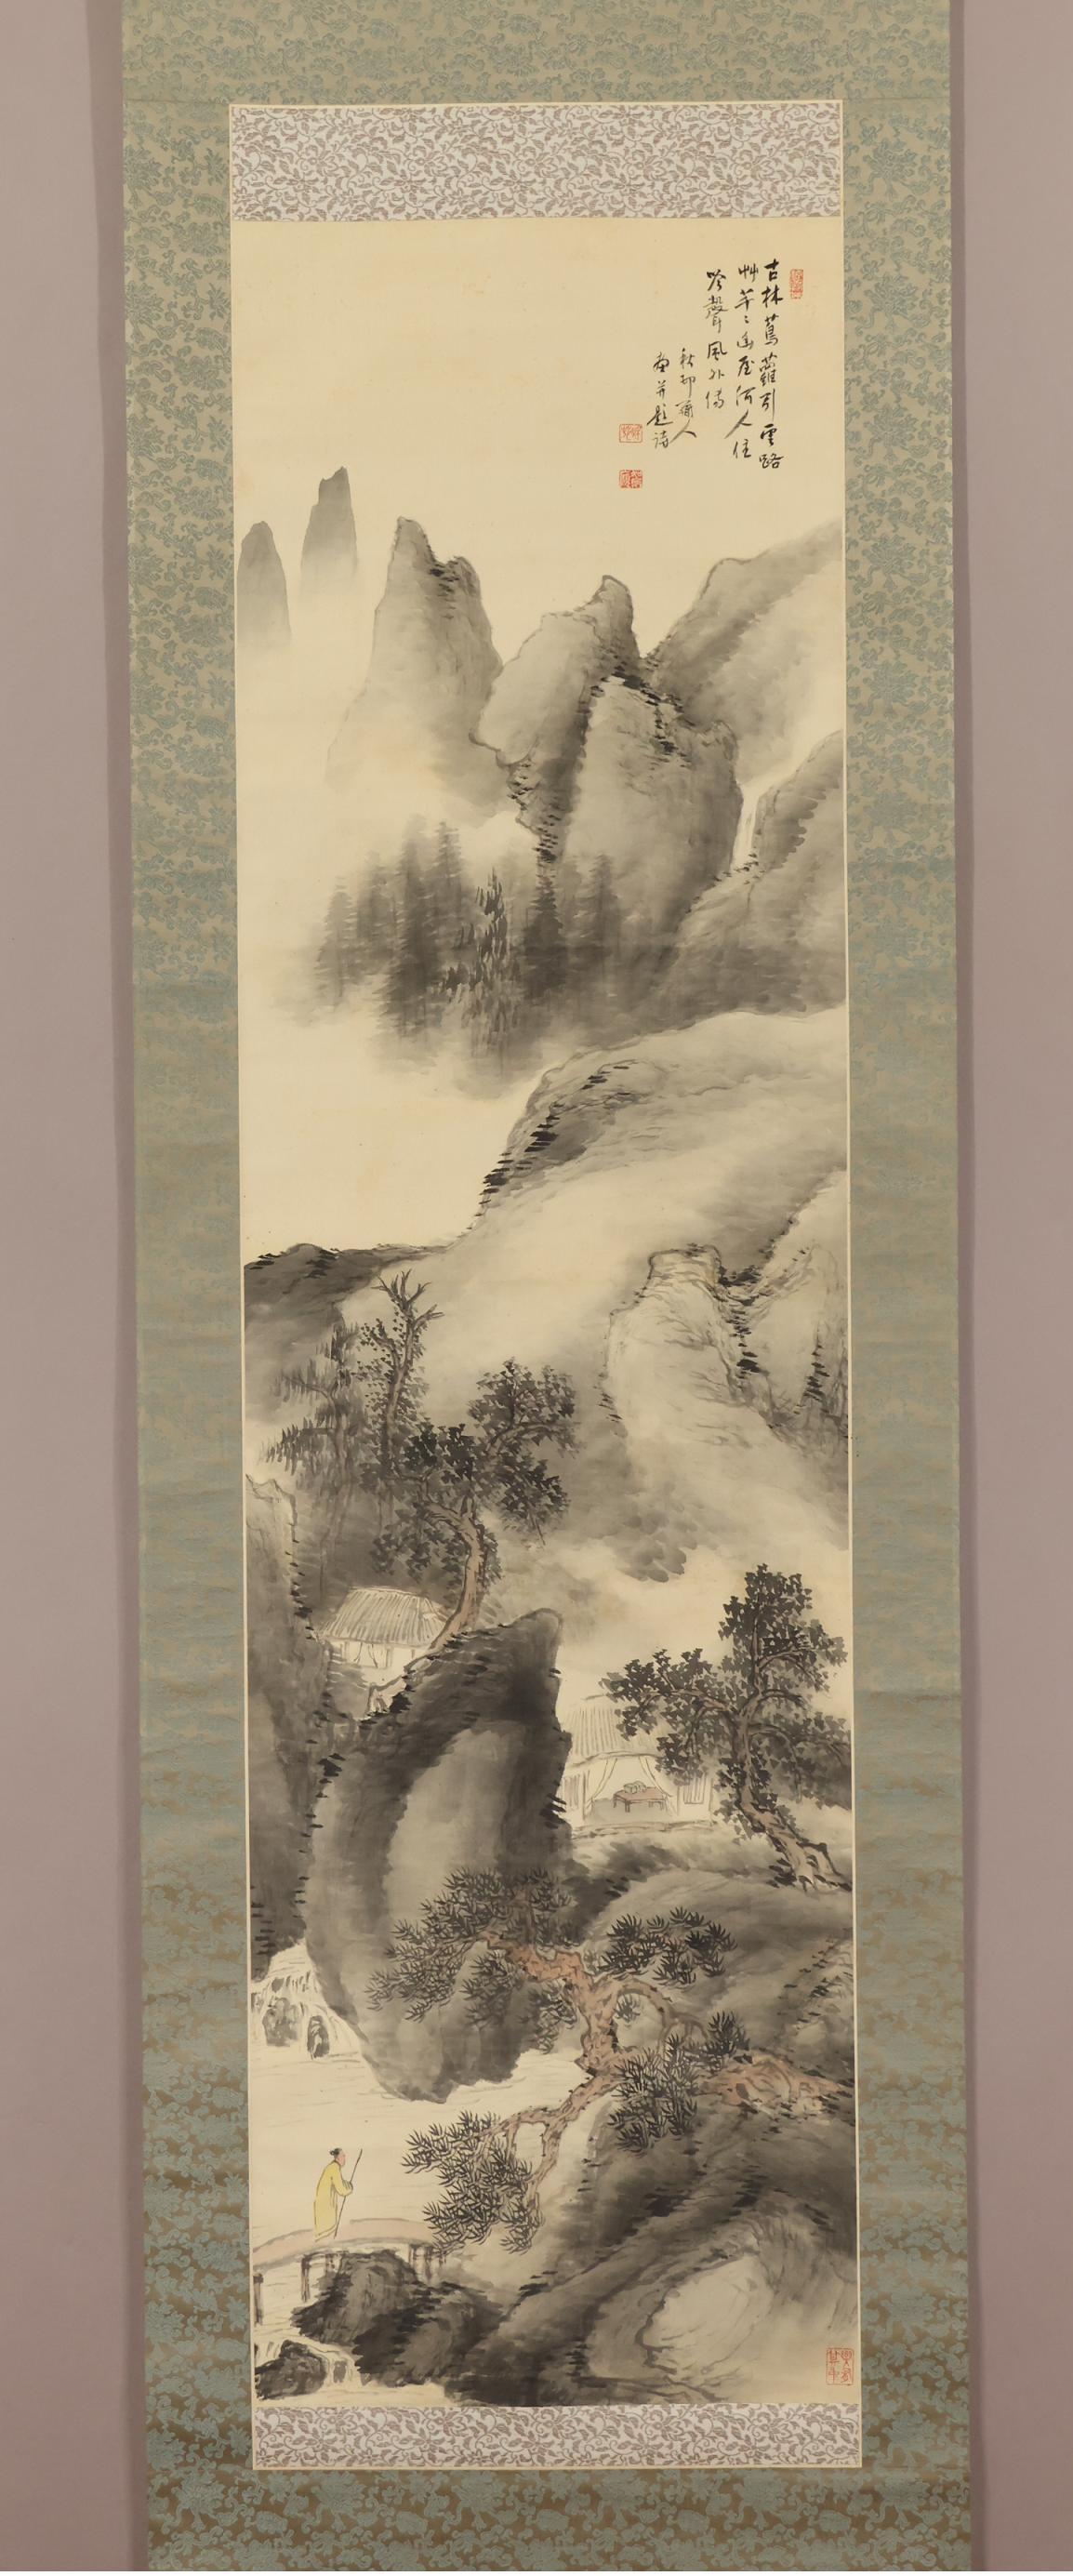 Authentic work ◆ Shuson Kono ◆ Illustrated landscape of the literati ◆ Shared box ◆ Landscape ◆ Ehime Prefecture ◆ Handpainted ◆ Silk  ◆ Hanging scroll ◆ 

Kōno Shūson (1890-1987) was one of those who devoted themselves to the promotion of Nanga (a